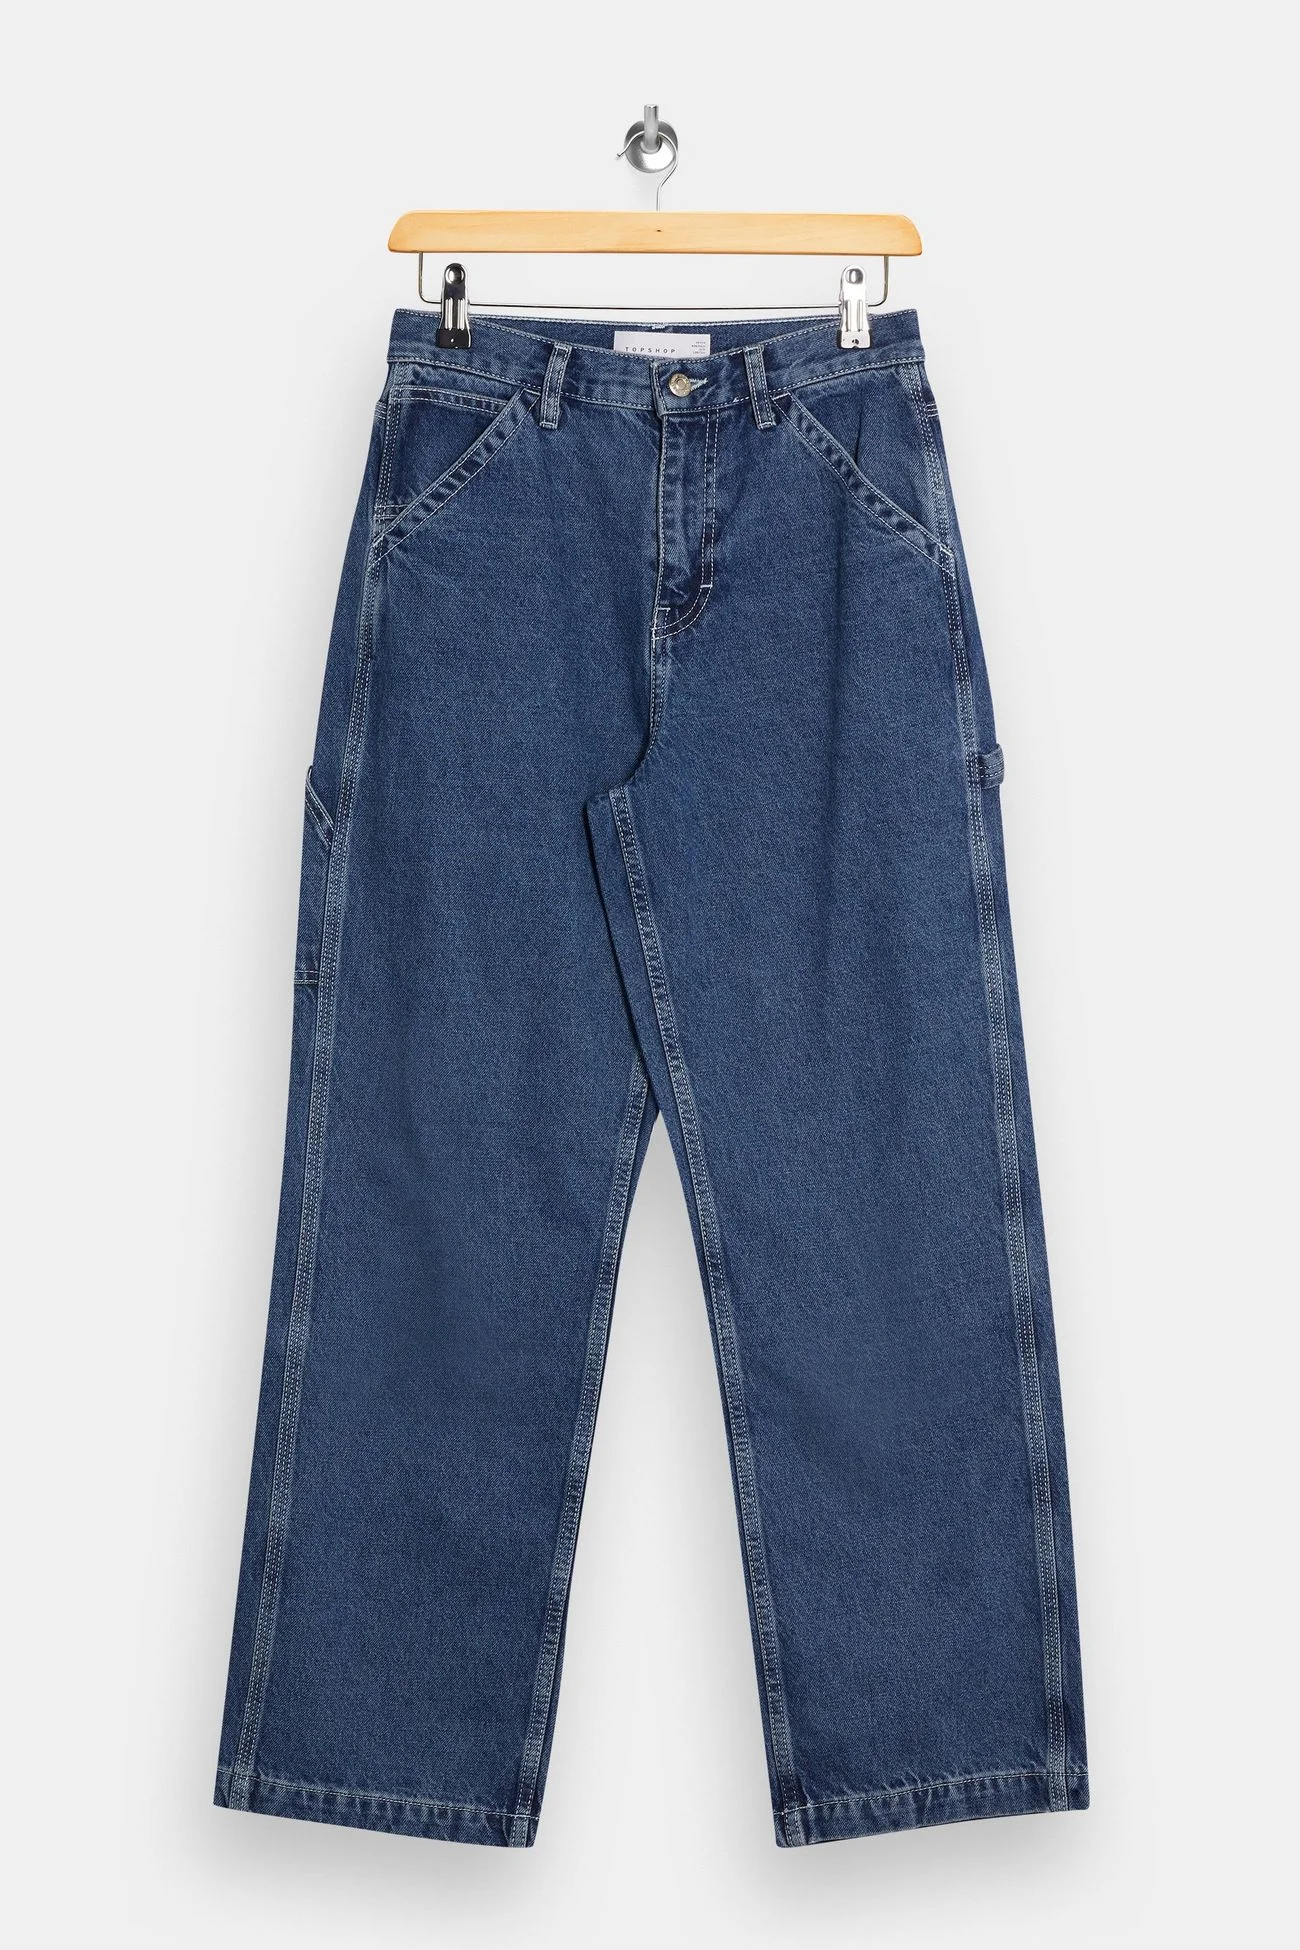 Topshop Petite straight jean in mid blue